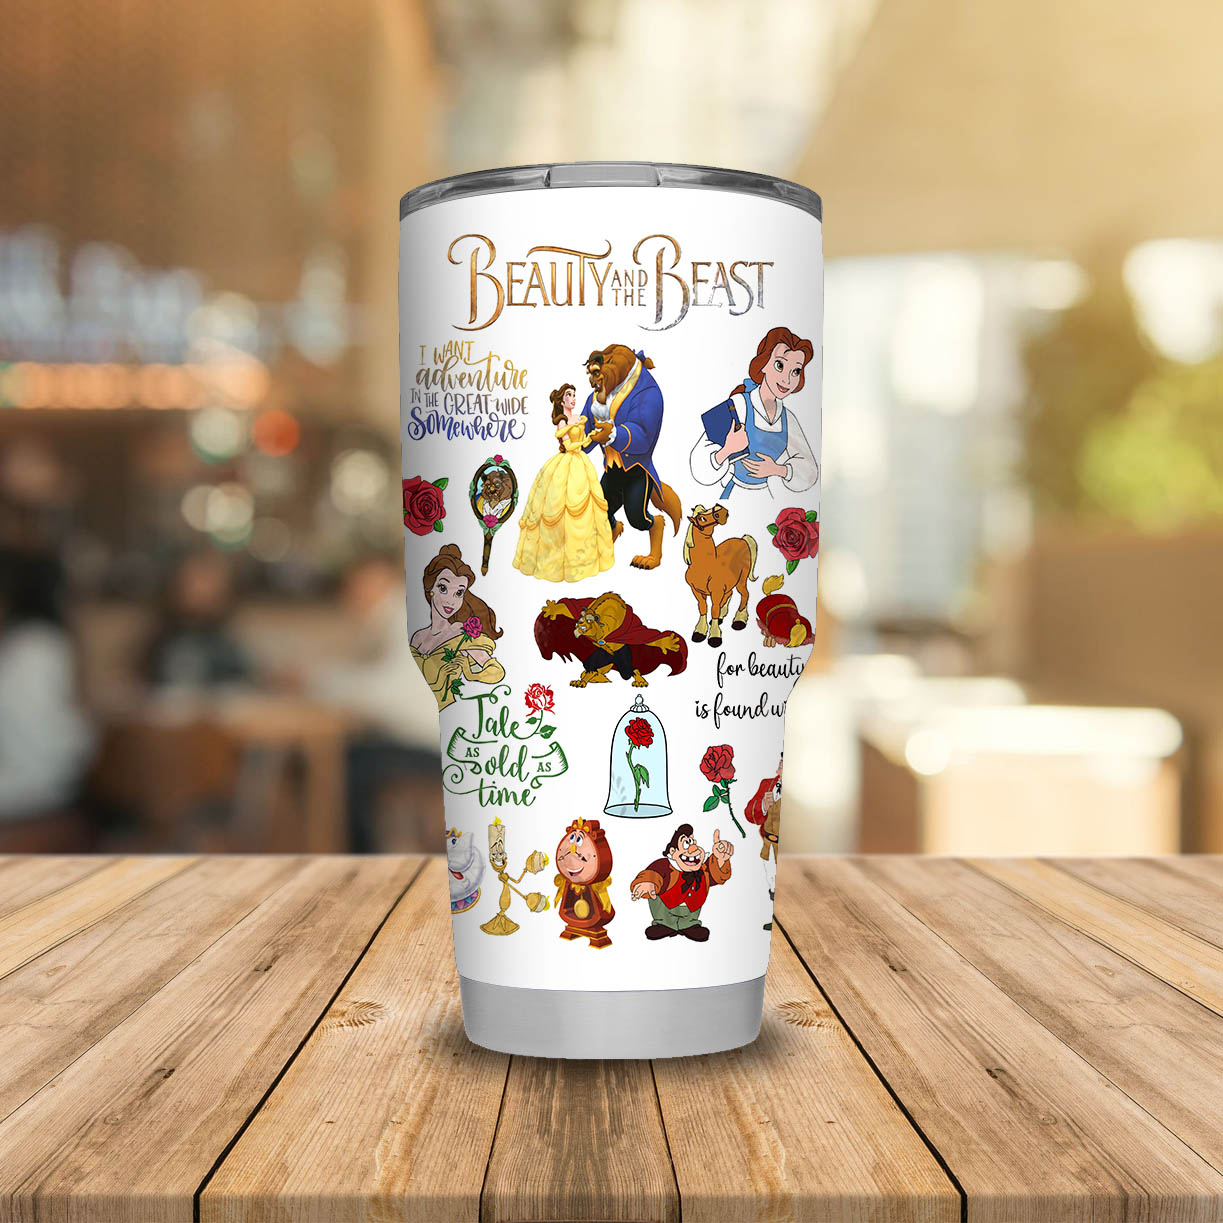 Belle Beauty and the Beast Tattooed Princess 20oz Tumbler. Phil